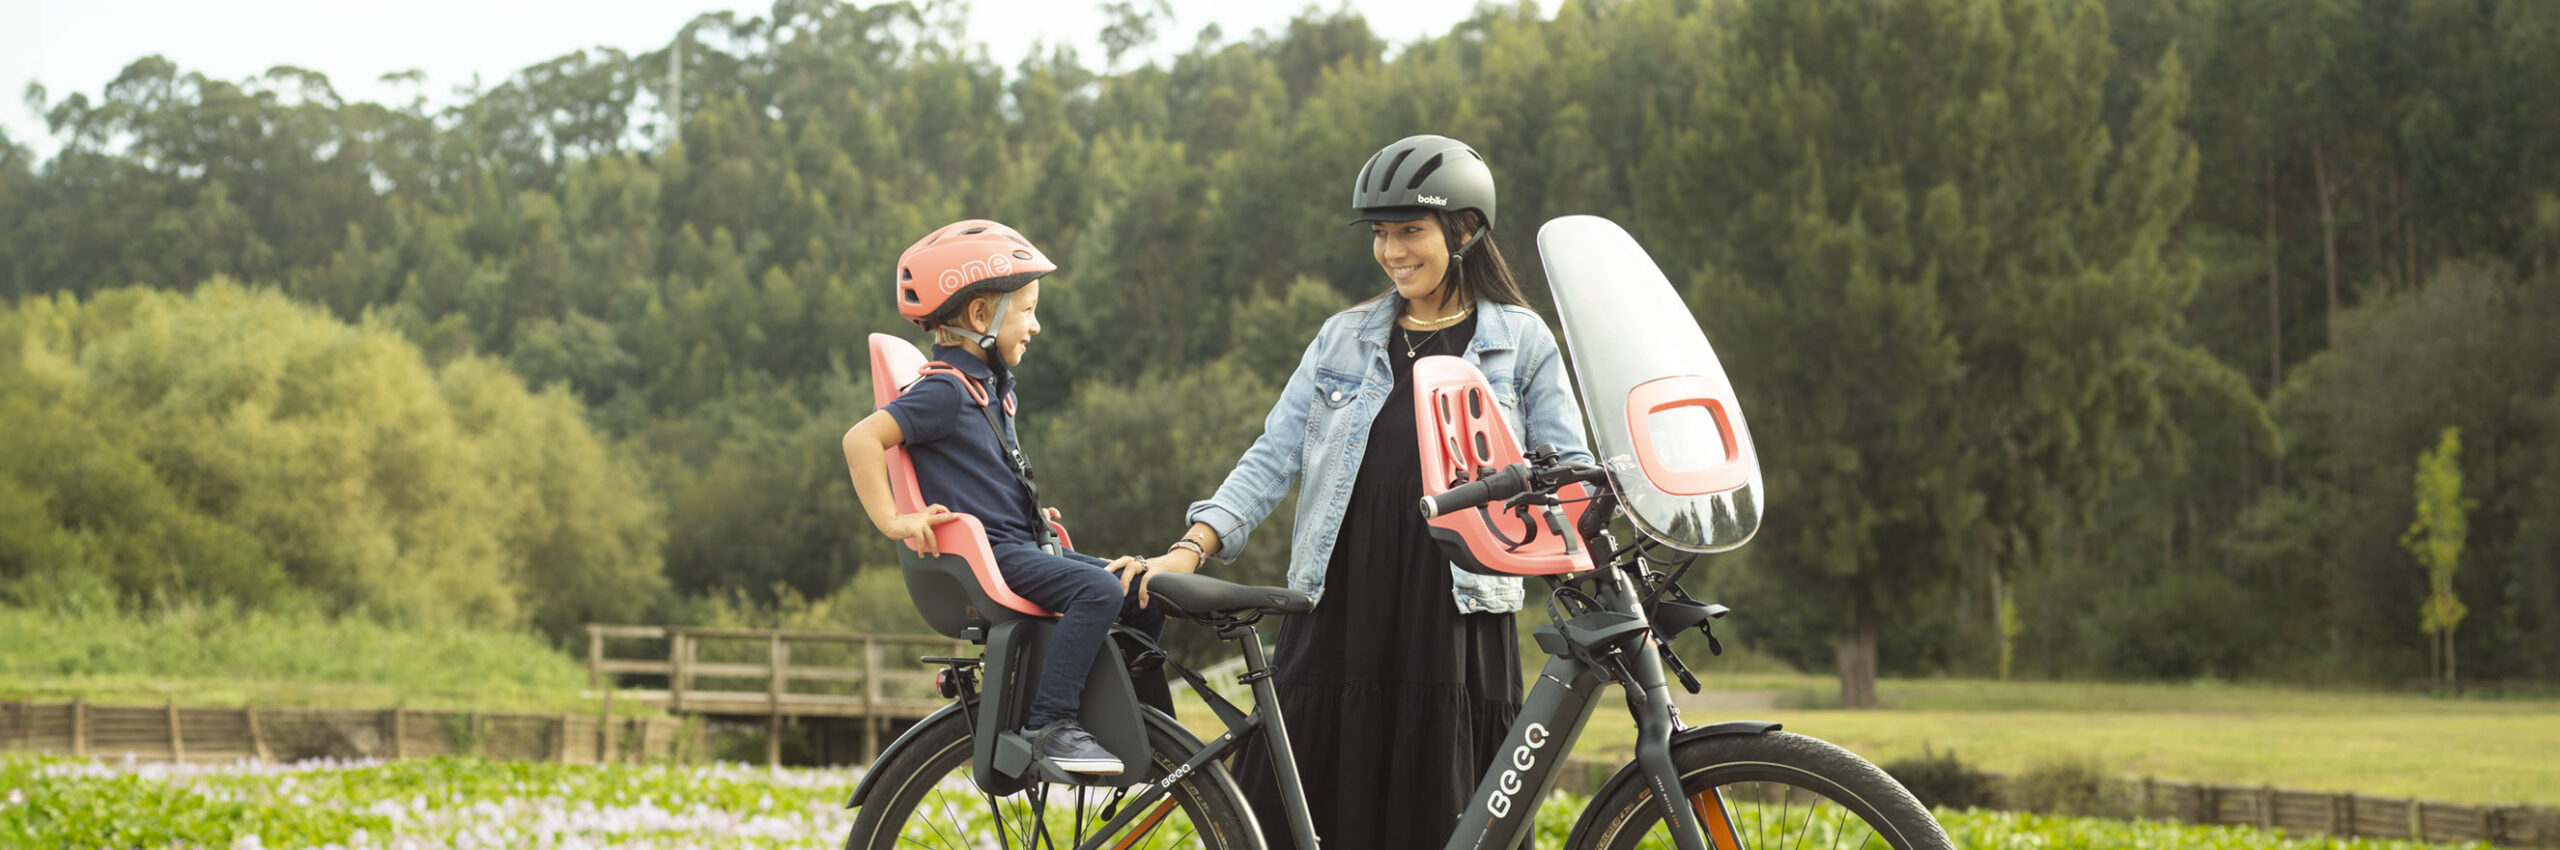 Bobike | Bicycle Safety Seats - Products gallery